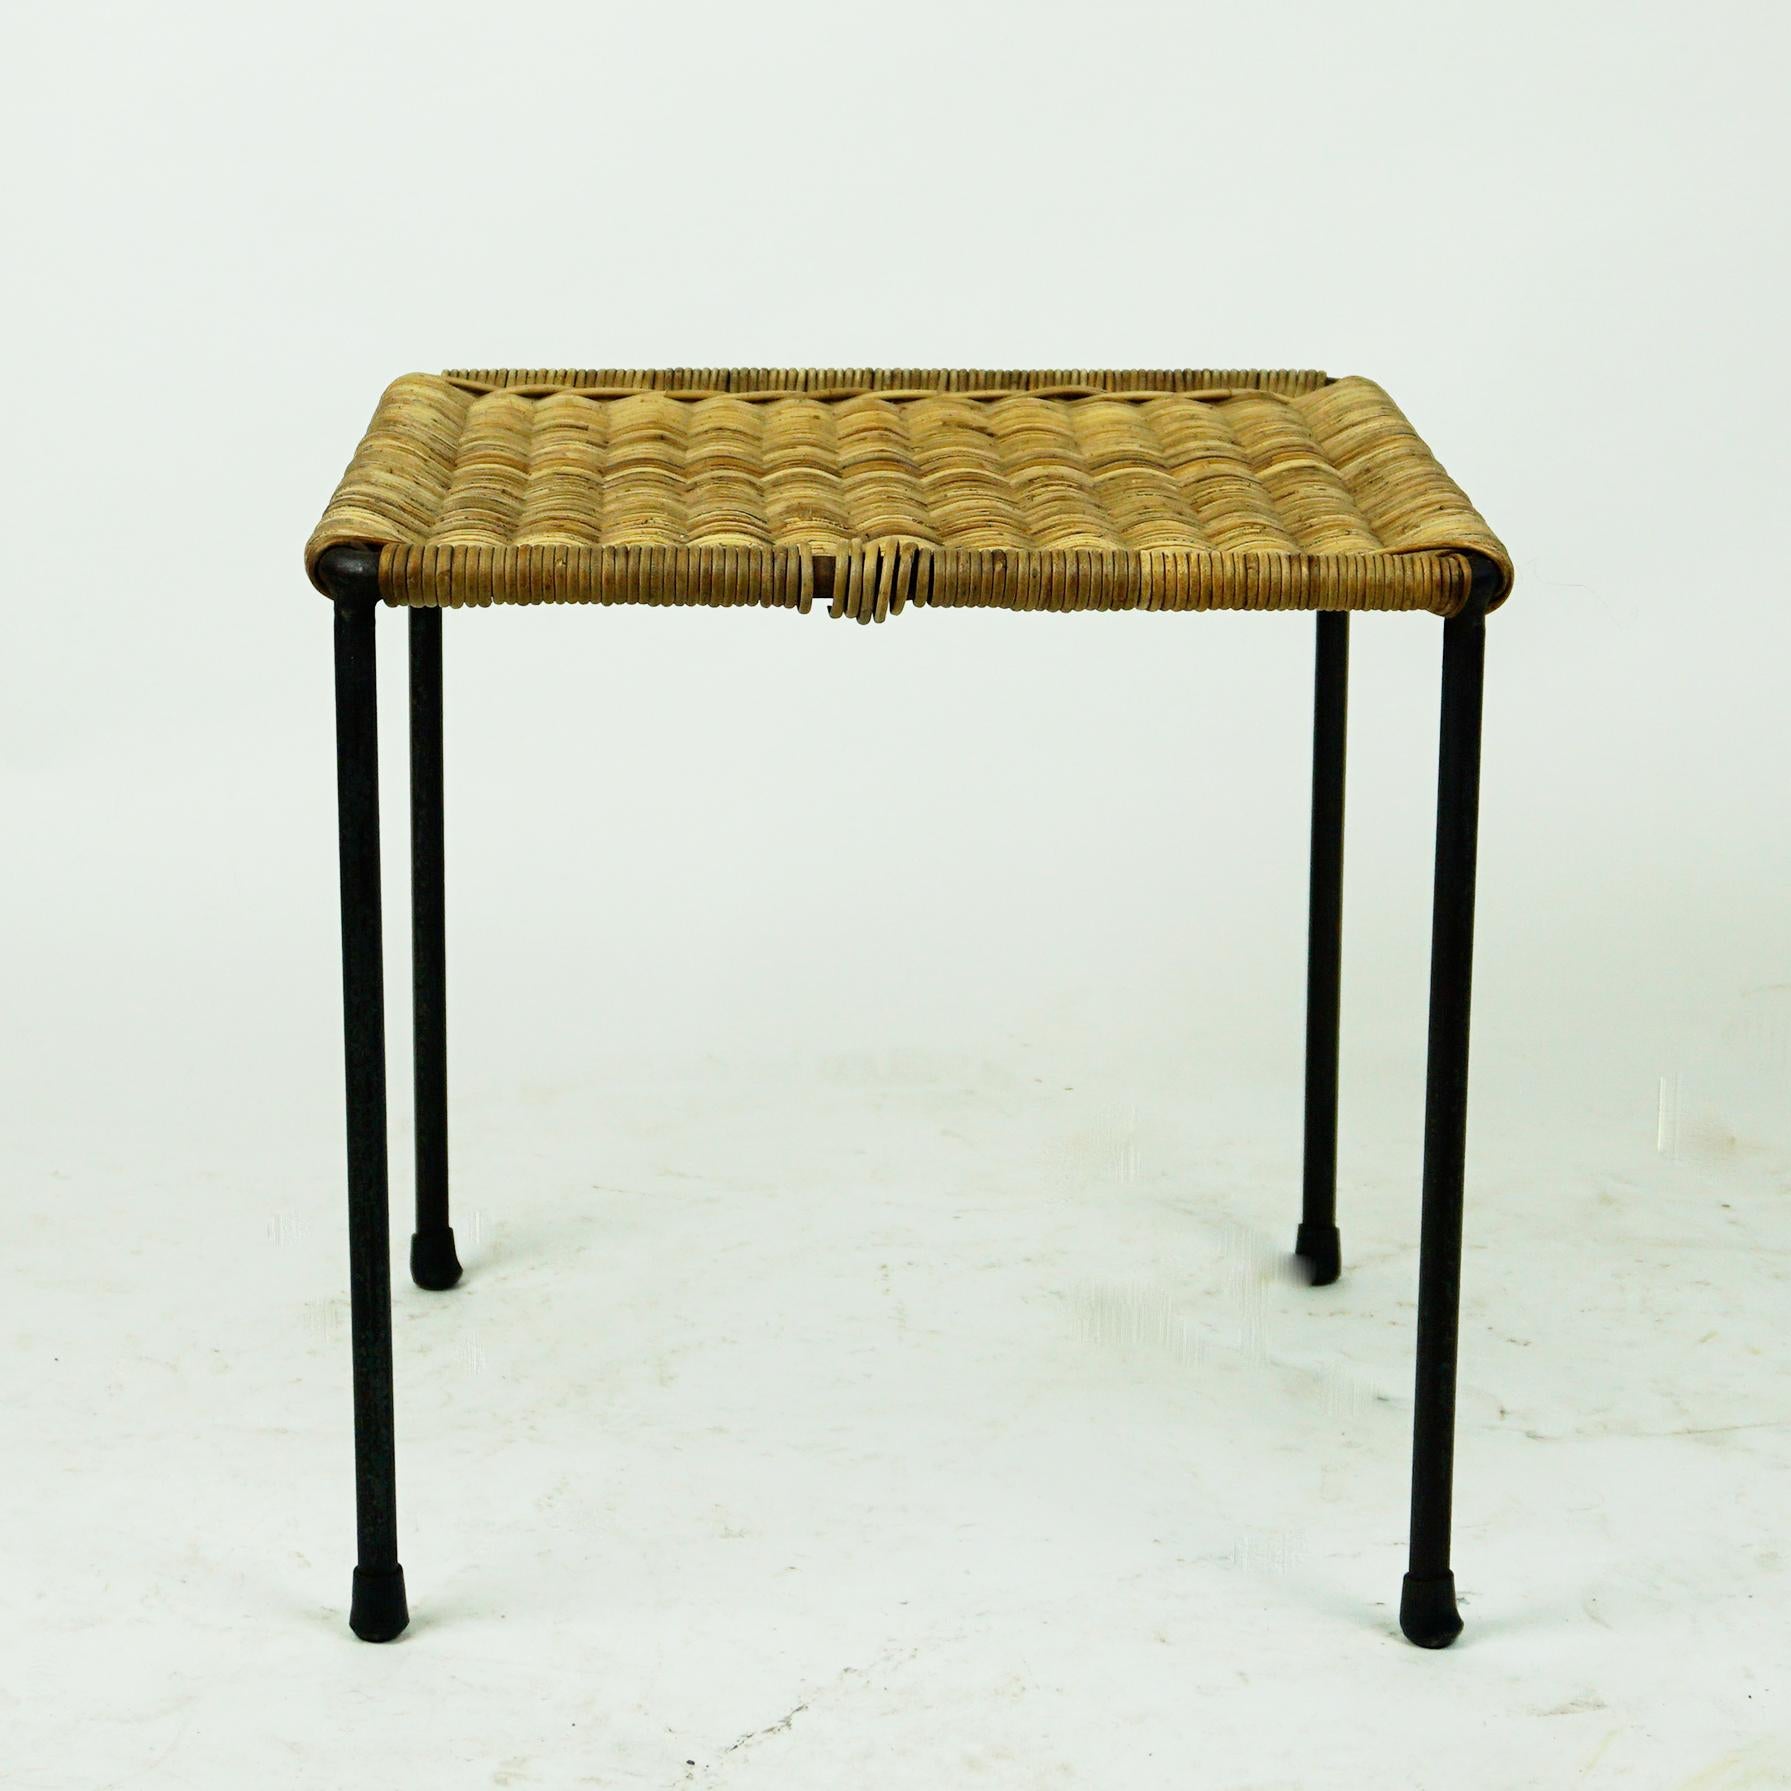 A charming small square sized table or stool designed and made by Carl Auböck II, Vienna, Austria, circa 1950 in beautiful original condition.
It´s frame is made from slender steel which has been lacquered in black and it has rubber shoes at the